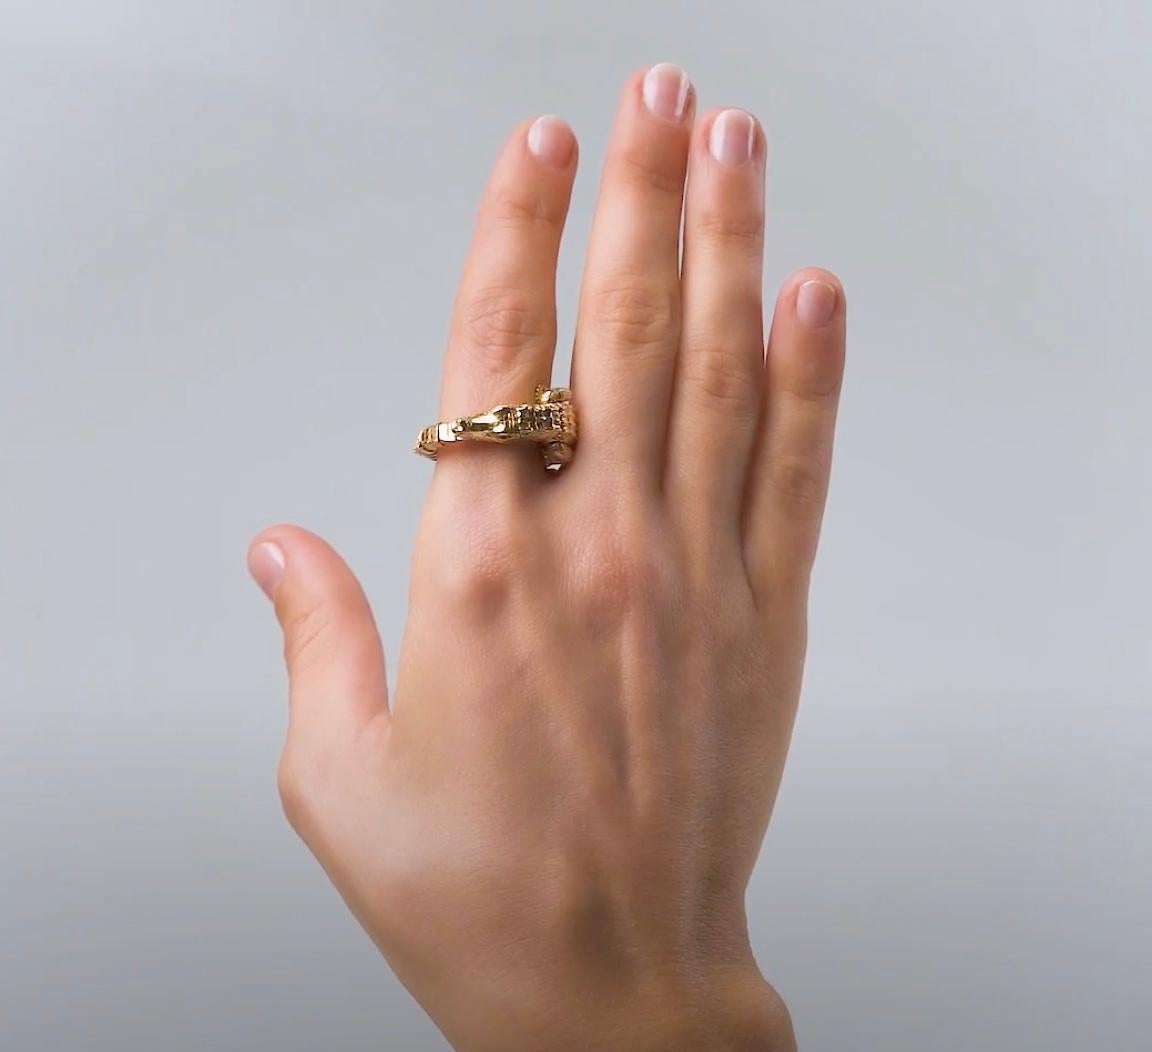 Playful yet with an opulent glamour, this piece is intriguing in its delicate mechanism. Designed as an intricately-crafted alligator in 18k yellow gold, the ring is entirely articulated, so that its body wraps around the finger. The alligator’s